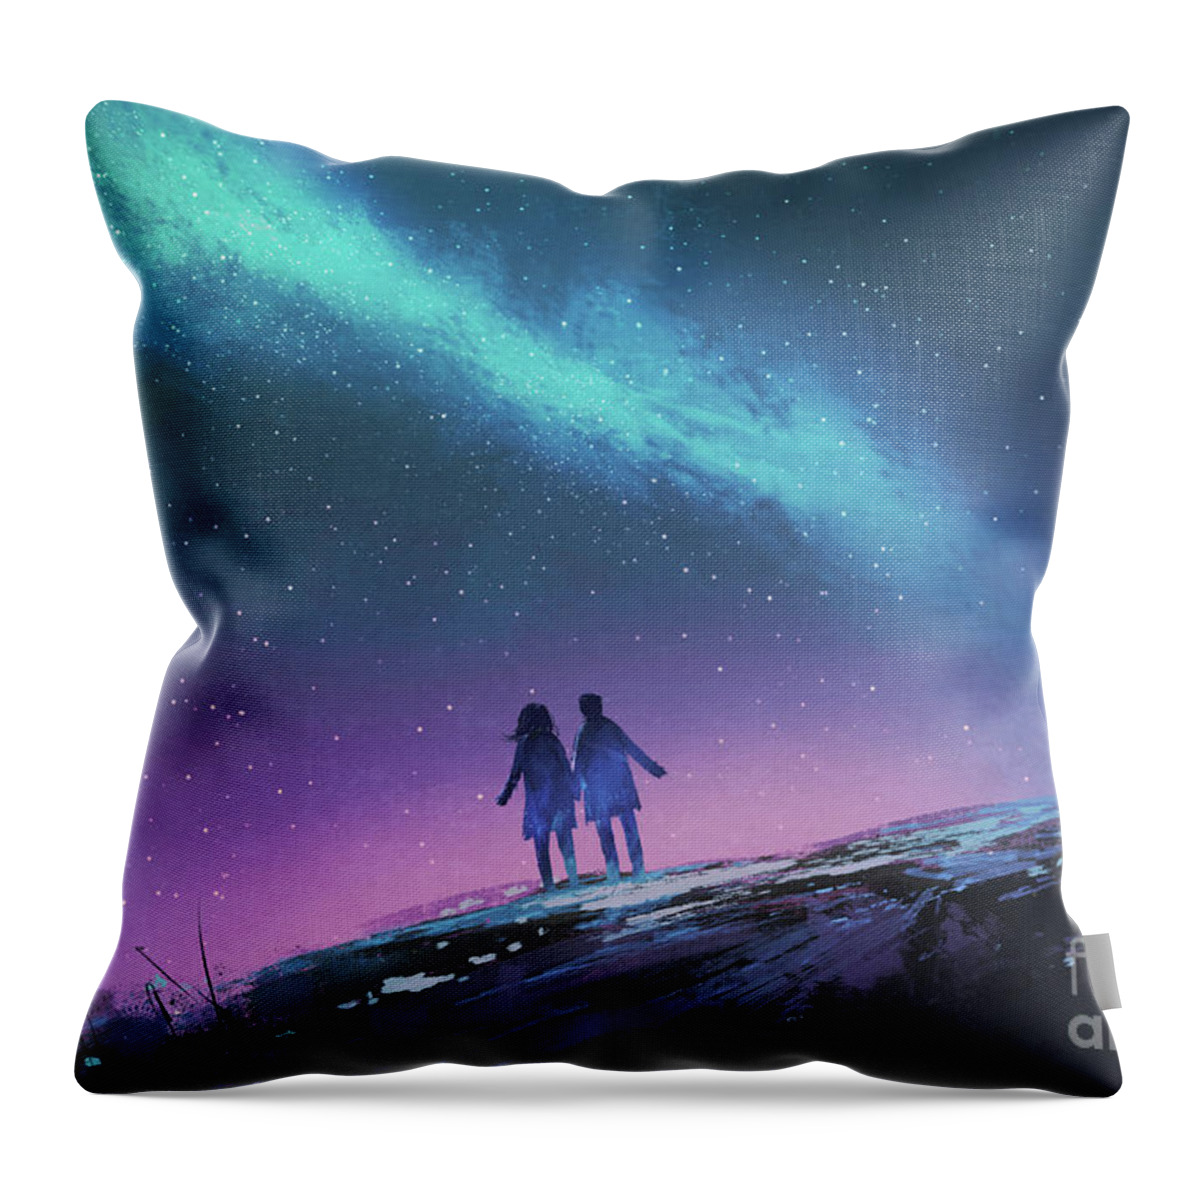 Acrylic Throw Pillow featuring the painting The Blue Light In The Night Sky by Tithi Luadthong